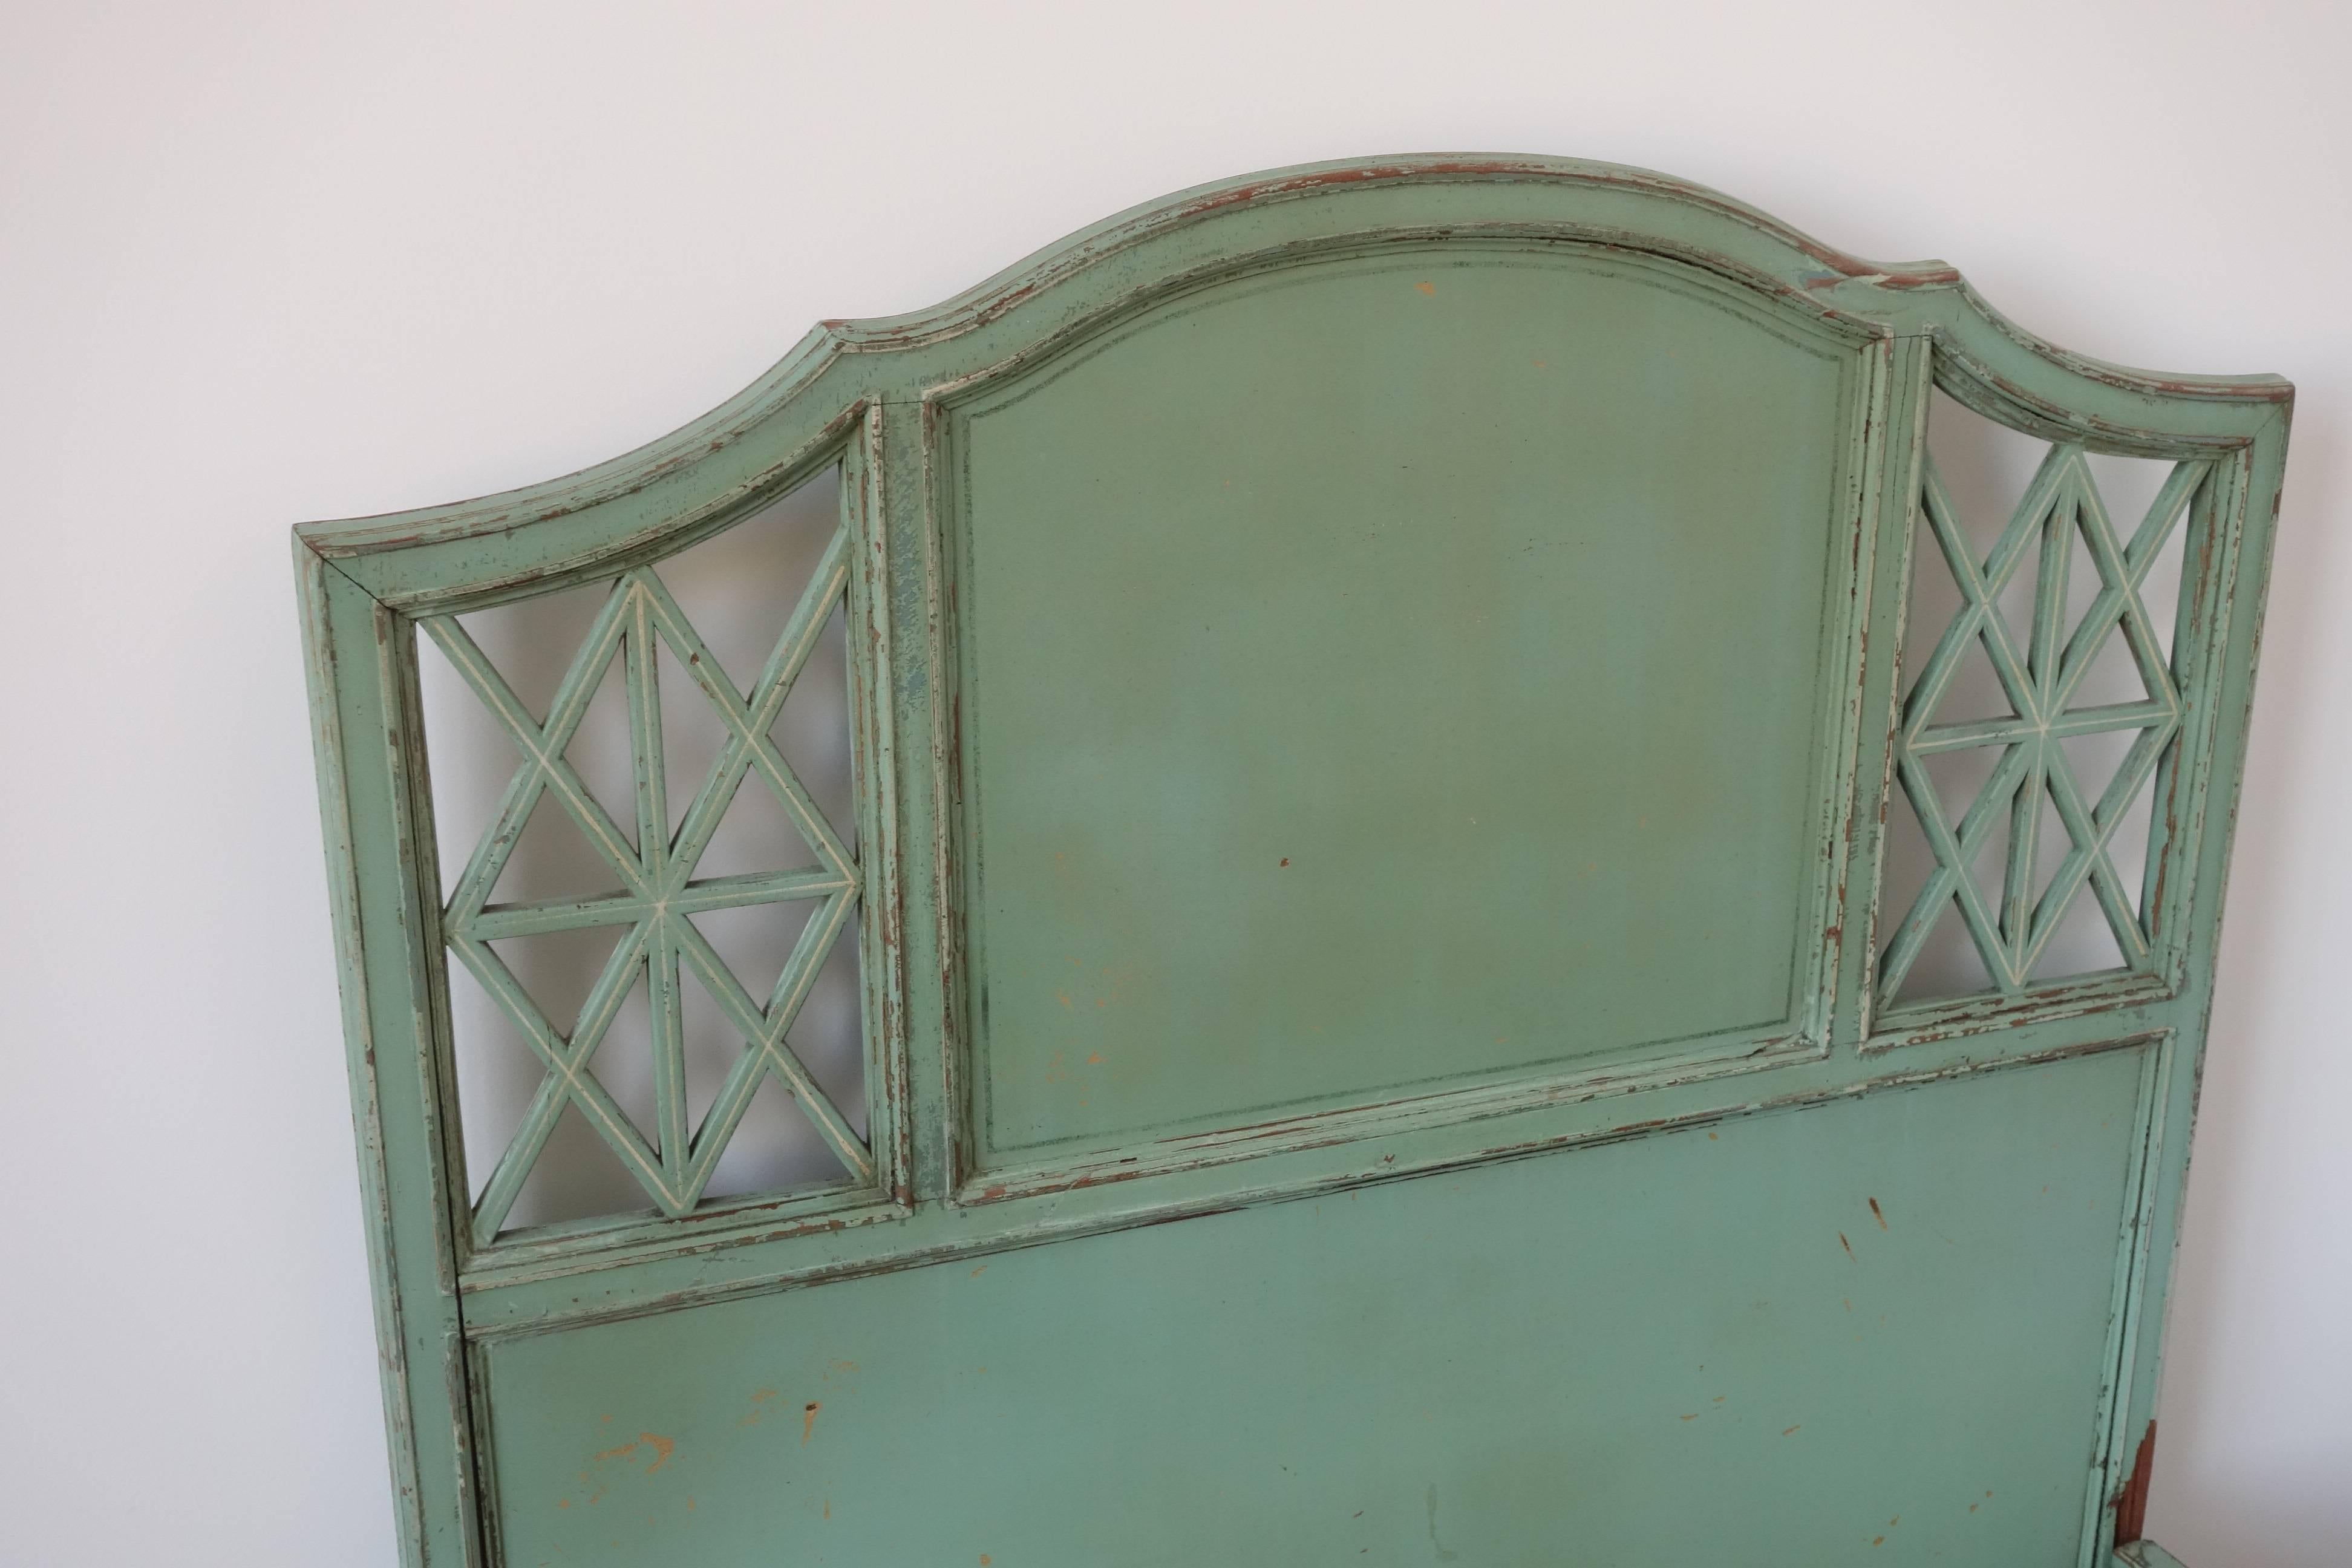 Green original paint. Good condition with small repair on the rail.